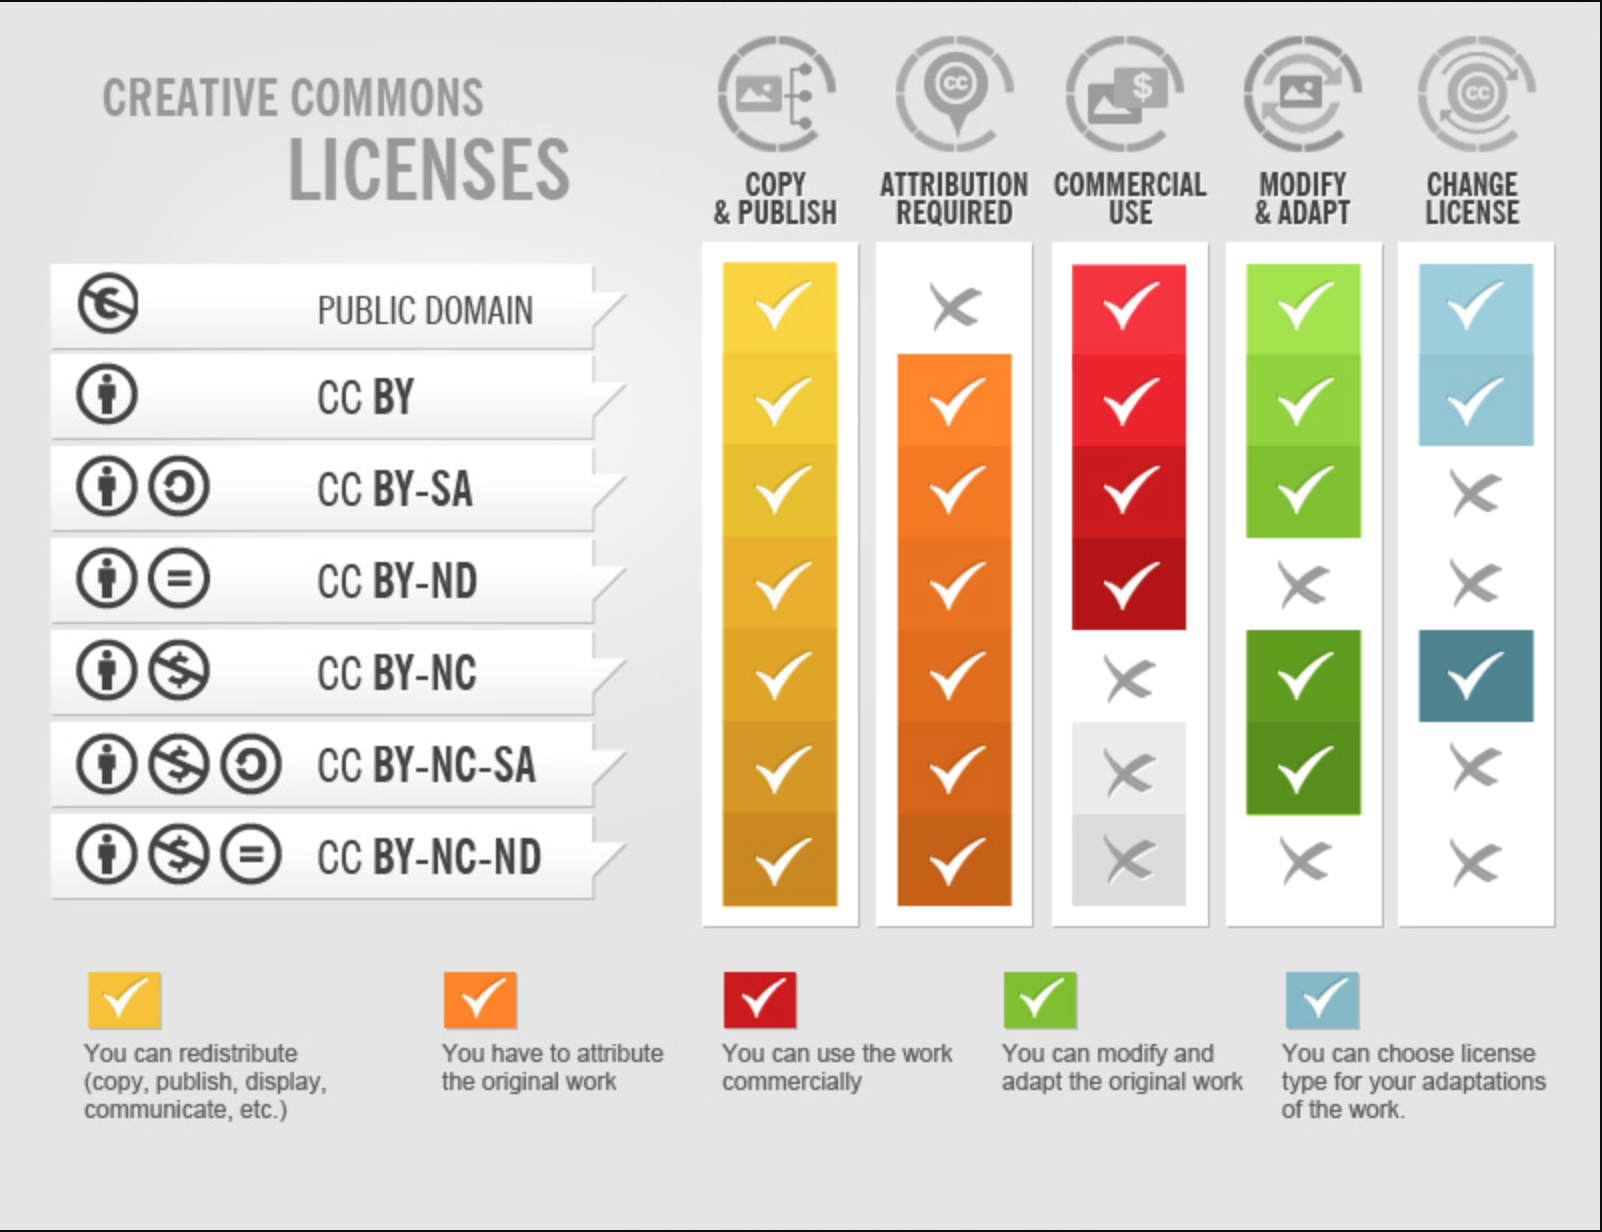 A chart of Creative Commons license types and their limitations regarding redistribution, attribution, commercial use, adaptation, and license changing.